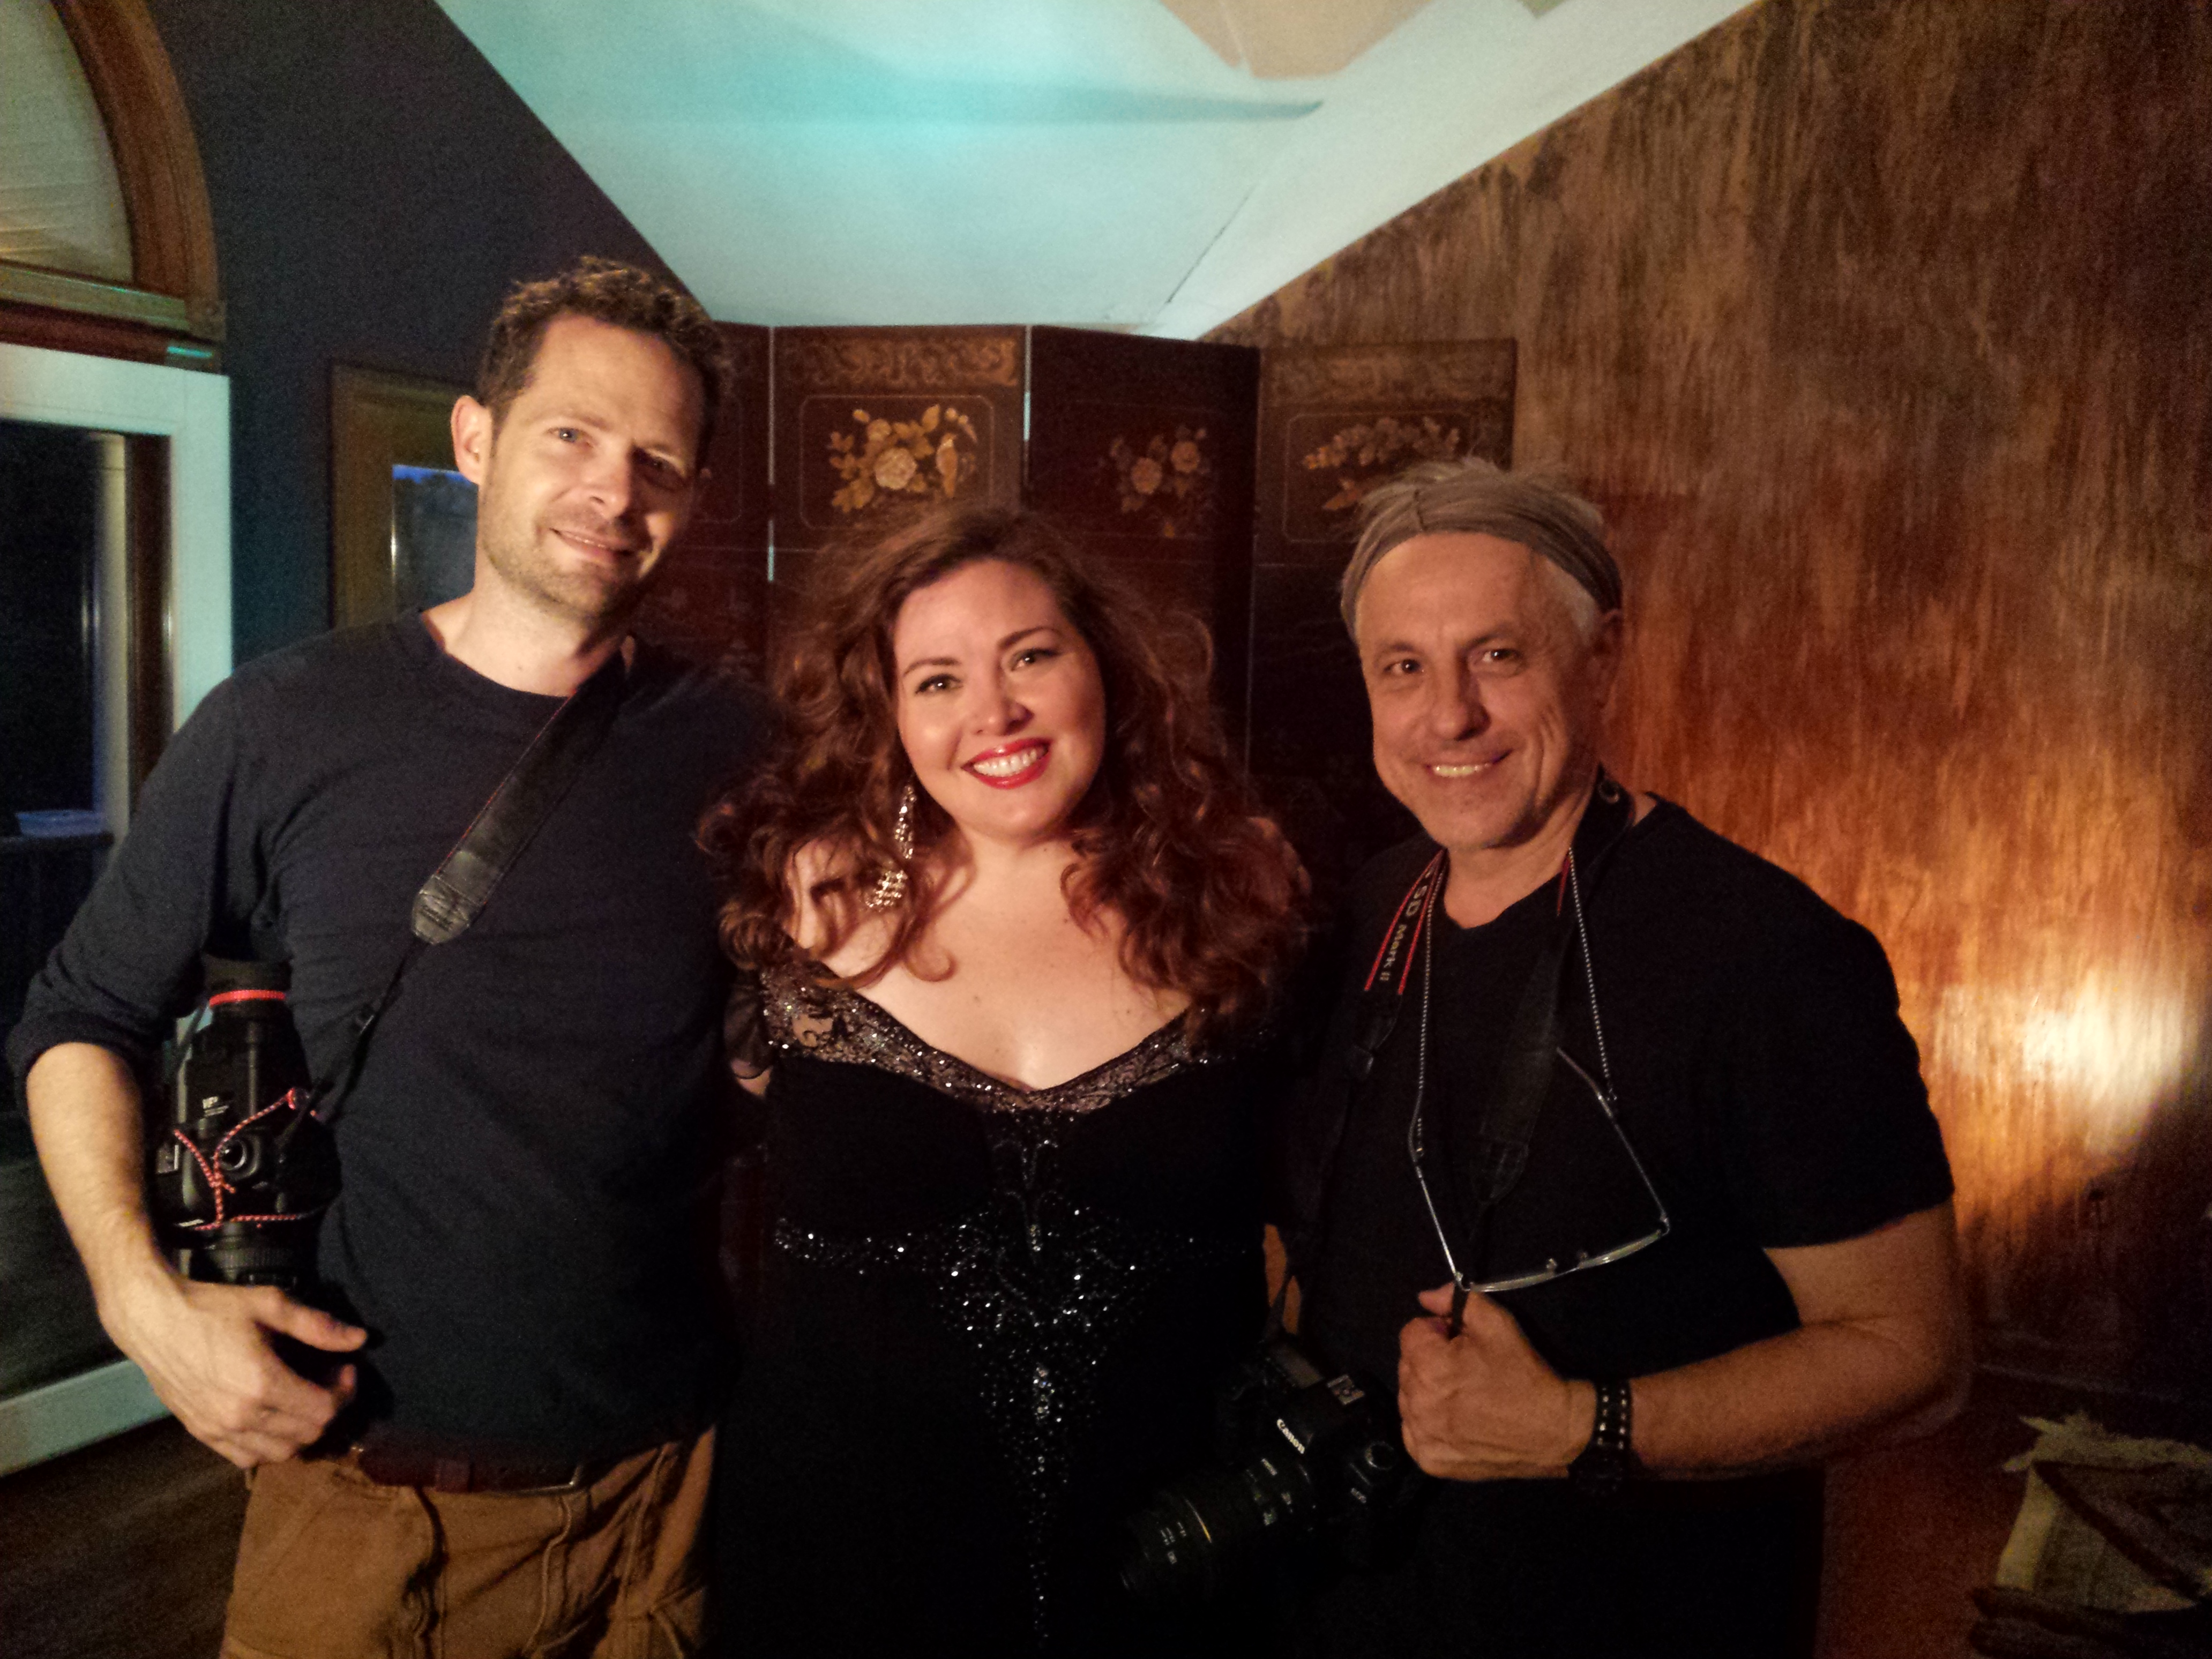 Camera two operator/editor Ryan Gowing, vocalist Blaze Kelly Coyle and Director/Camera one op Peter Gourniak.